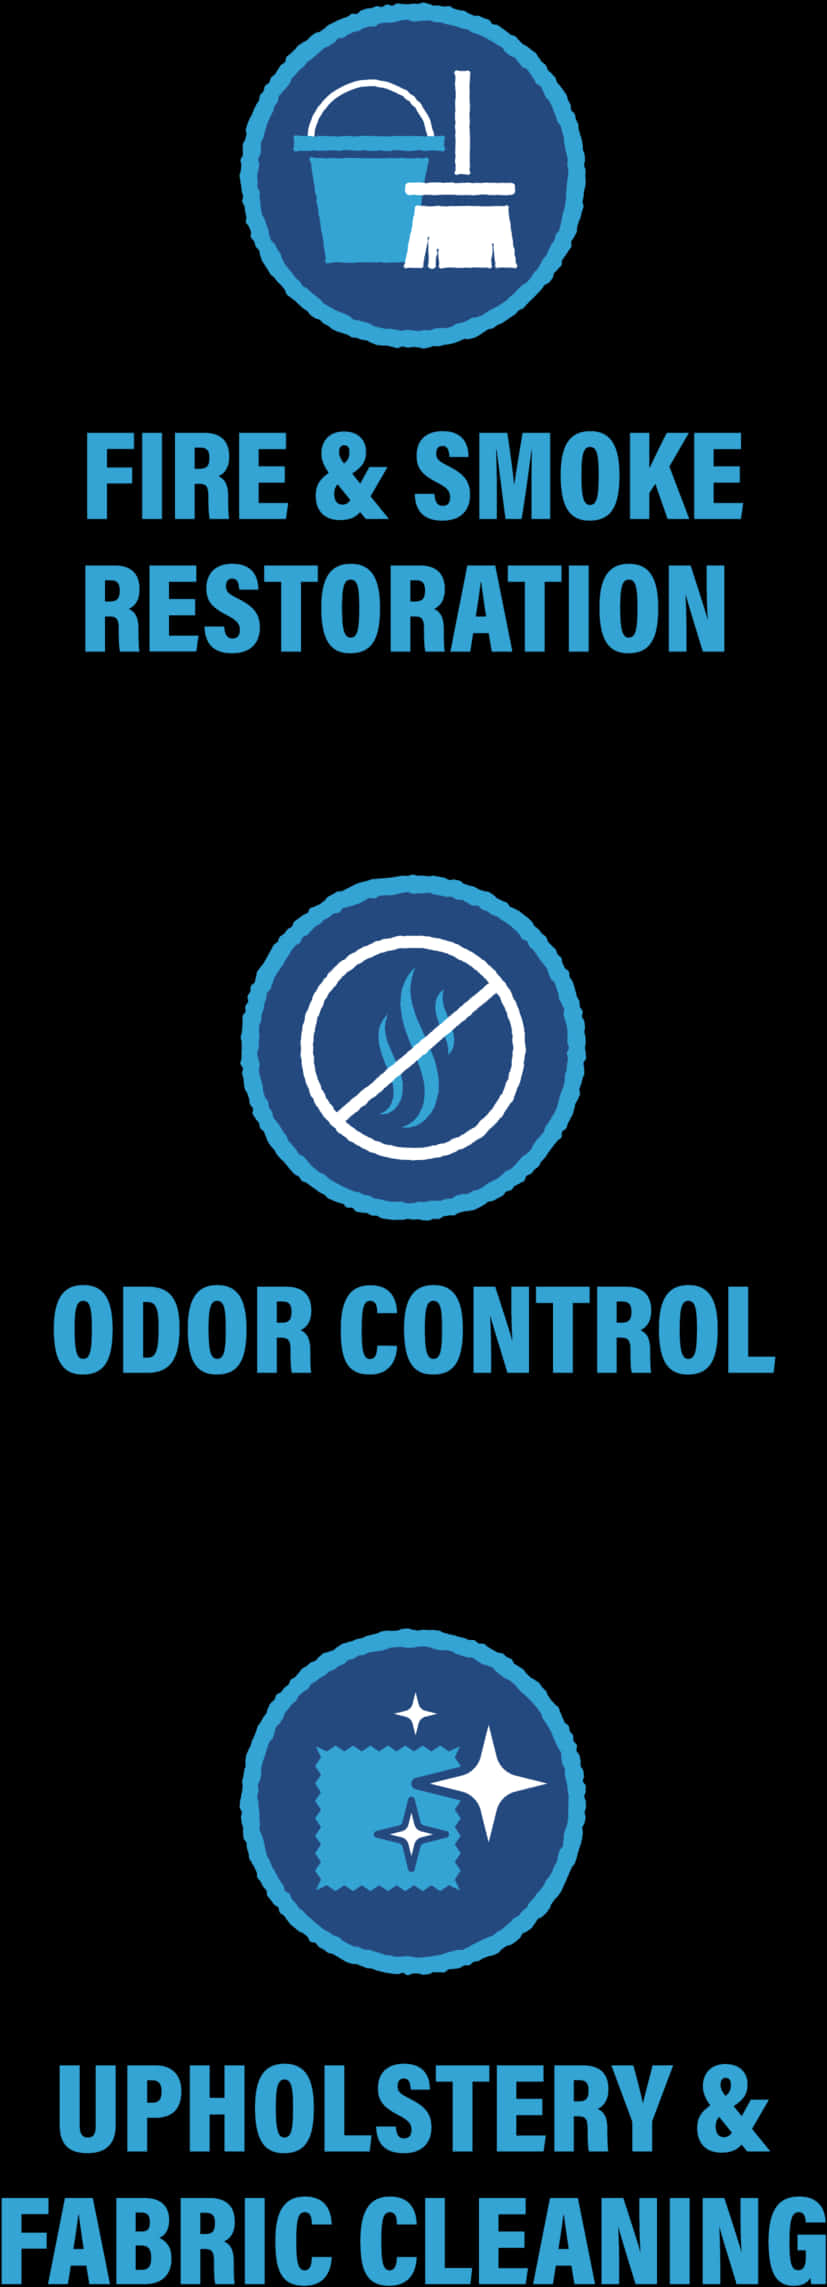 Fire Smoke Restoration Odor Control Upholstery Cleaning Services